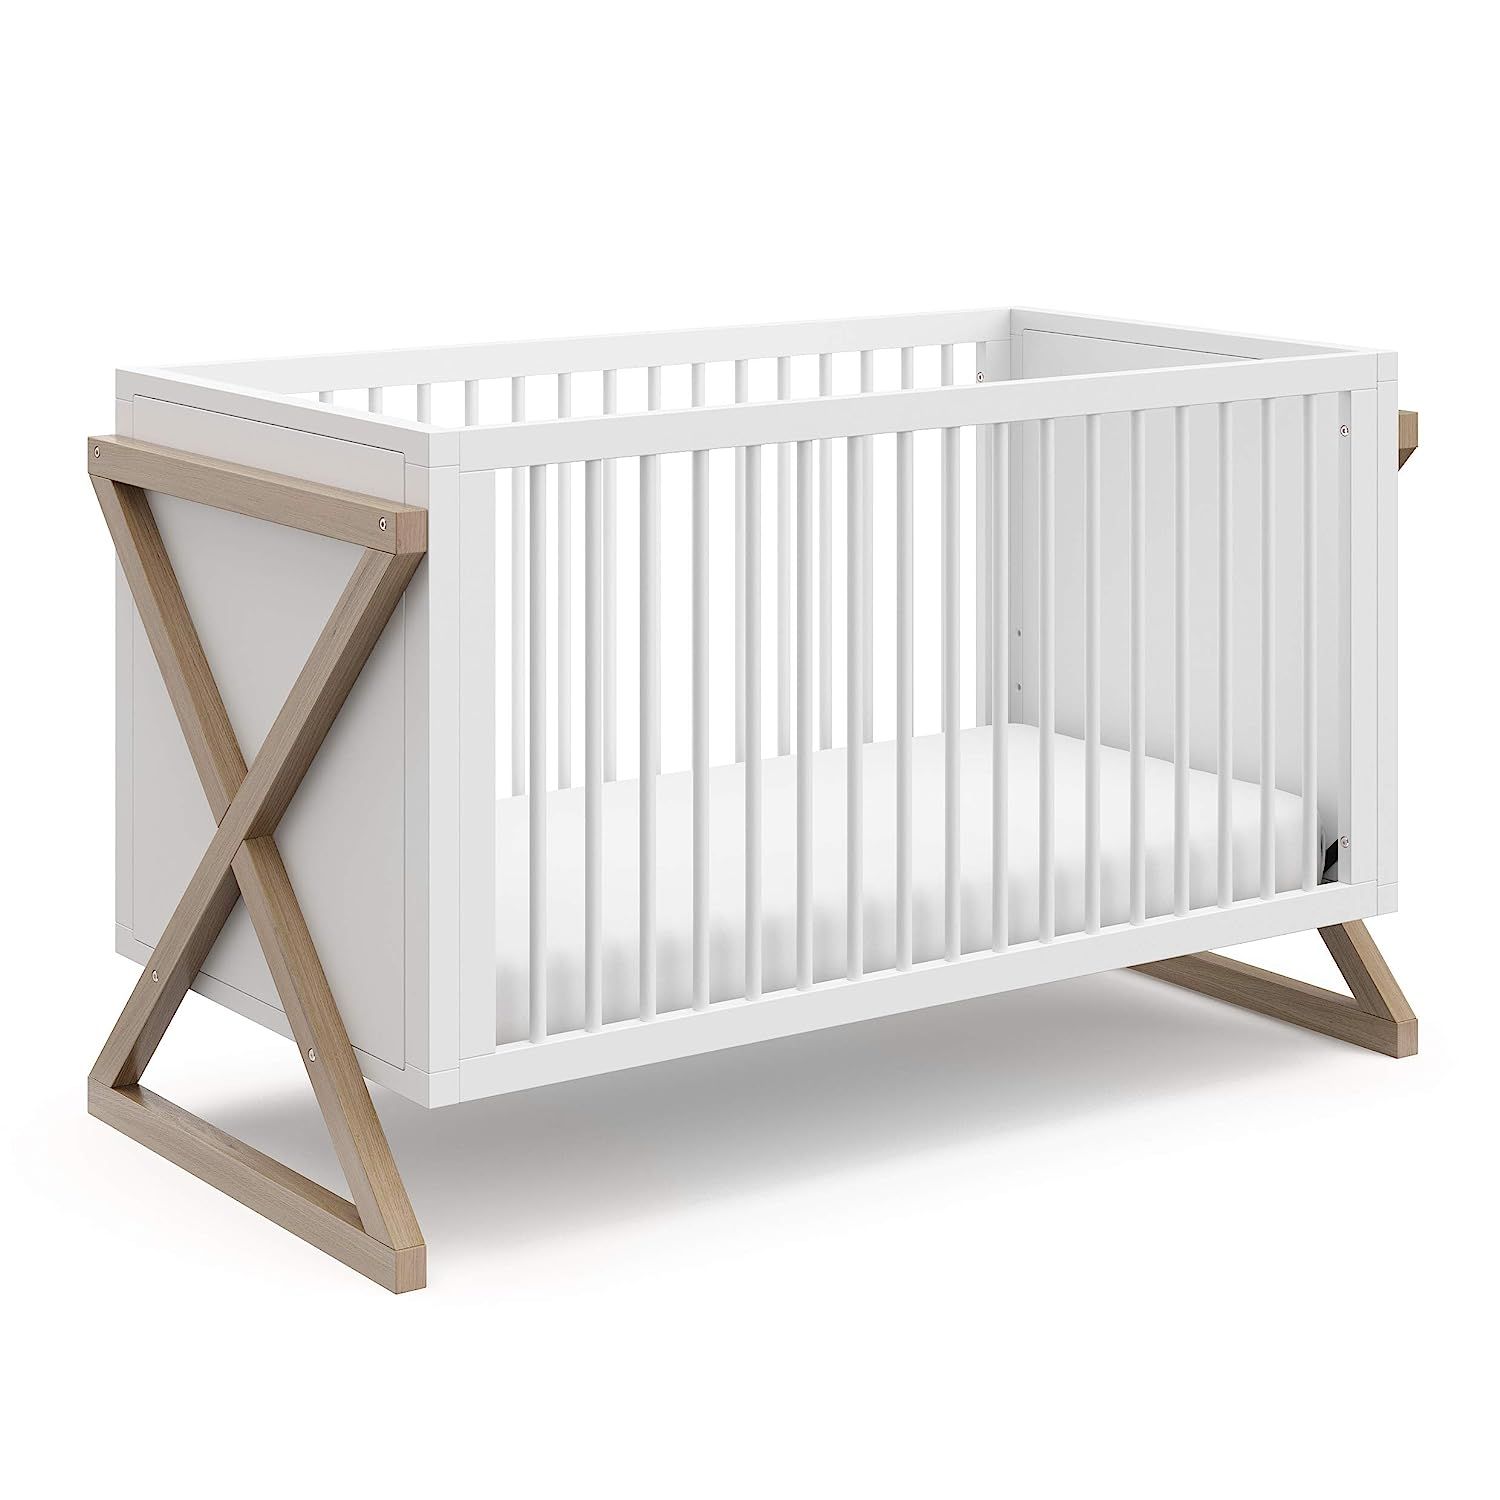 Storkcraft Equinox 3-in-1 Convertible Crib (Vintage Driftwood) – Easily Converts to Toddler Bed... | Amazon (US)